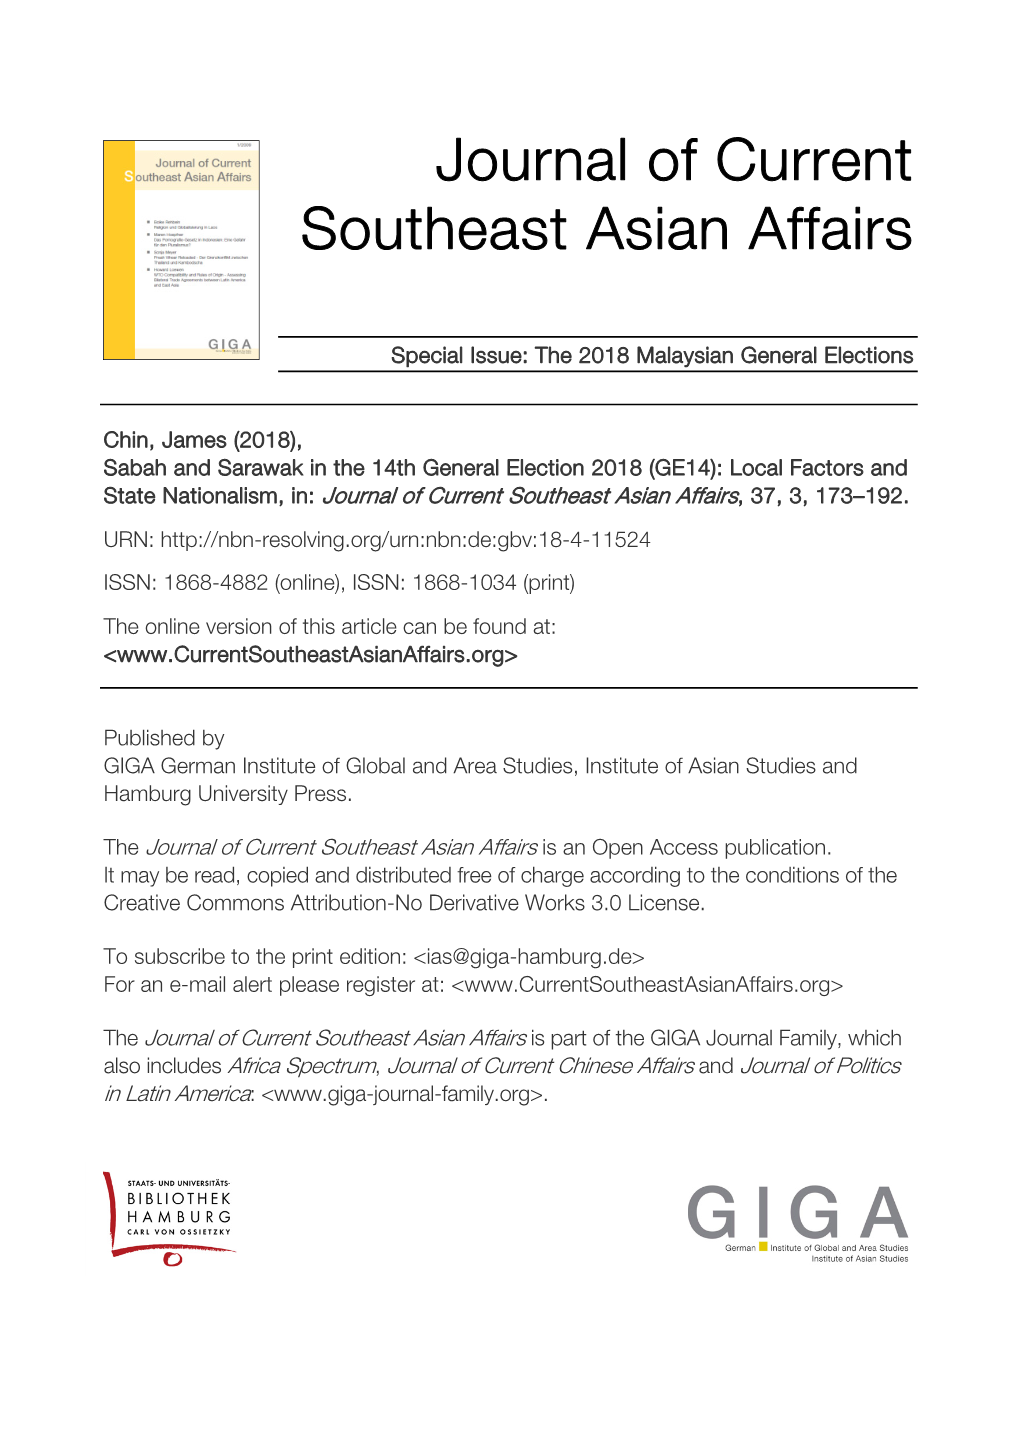 Sabah and Sarawak in the 14Th General Election 2018 (GE14): Local Factors and State Nationalism, In: Journal of Current Southeast Asian Affairs, 37, 3, 173–192